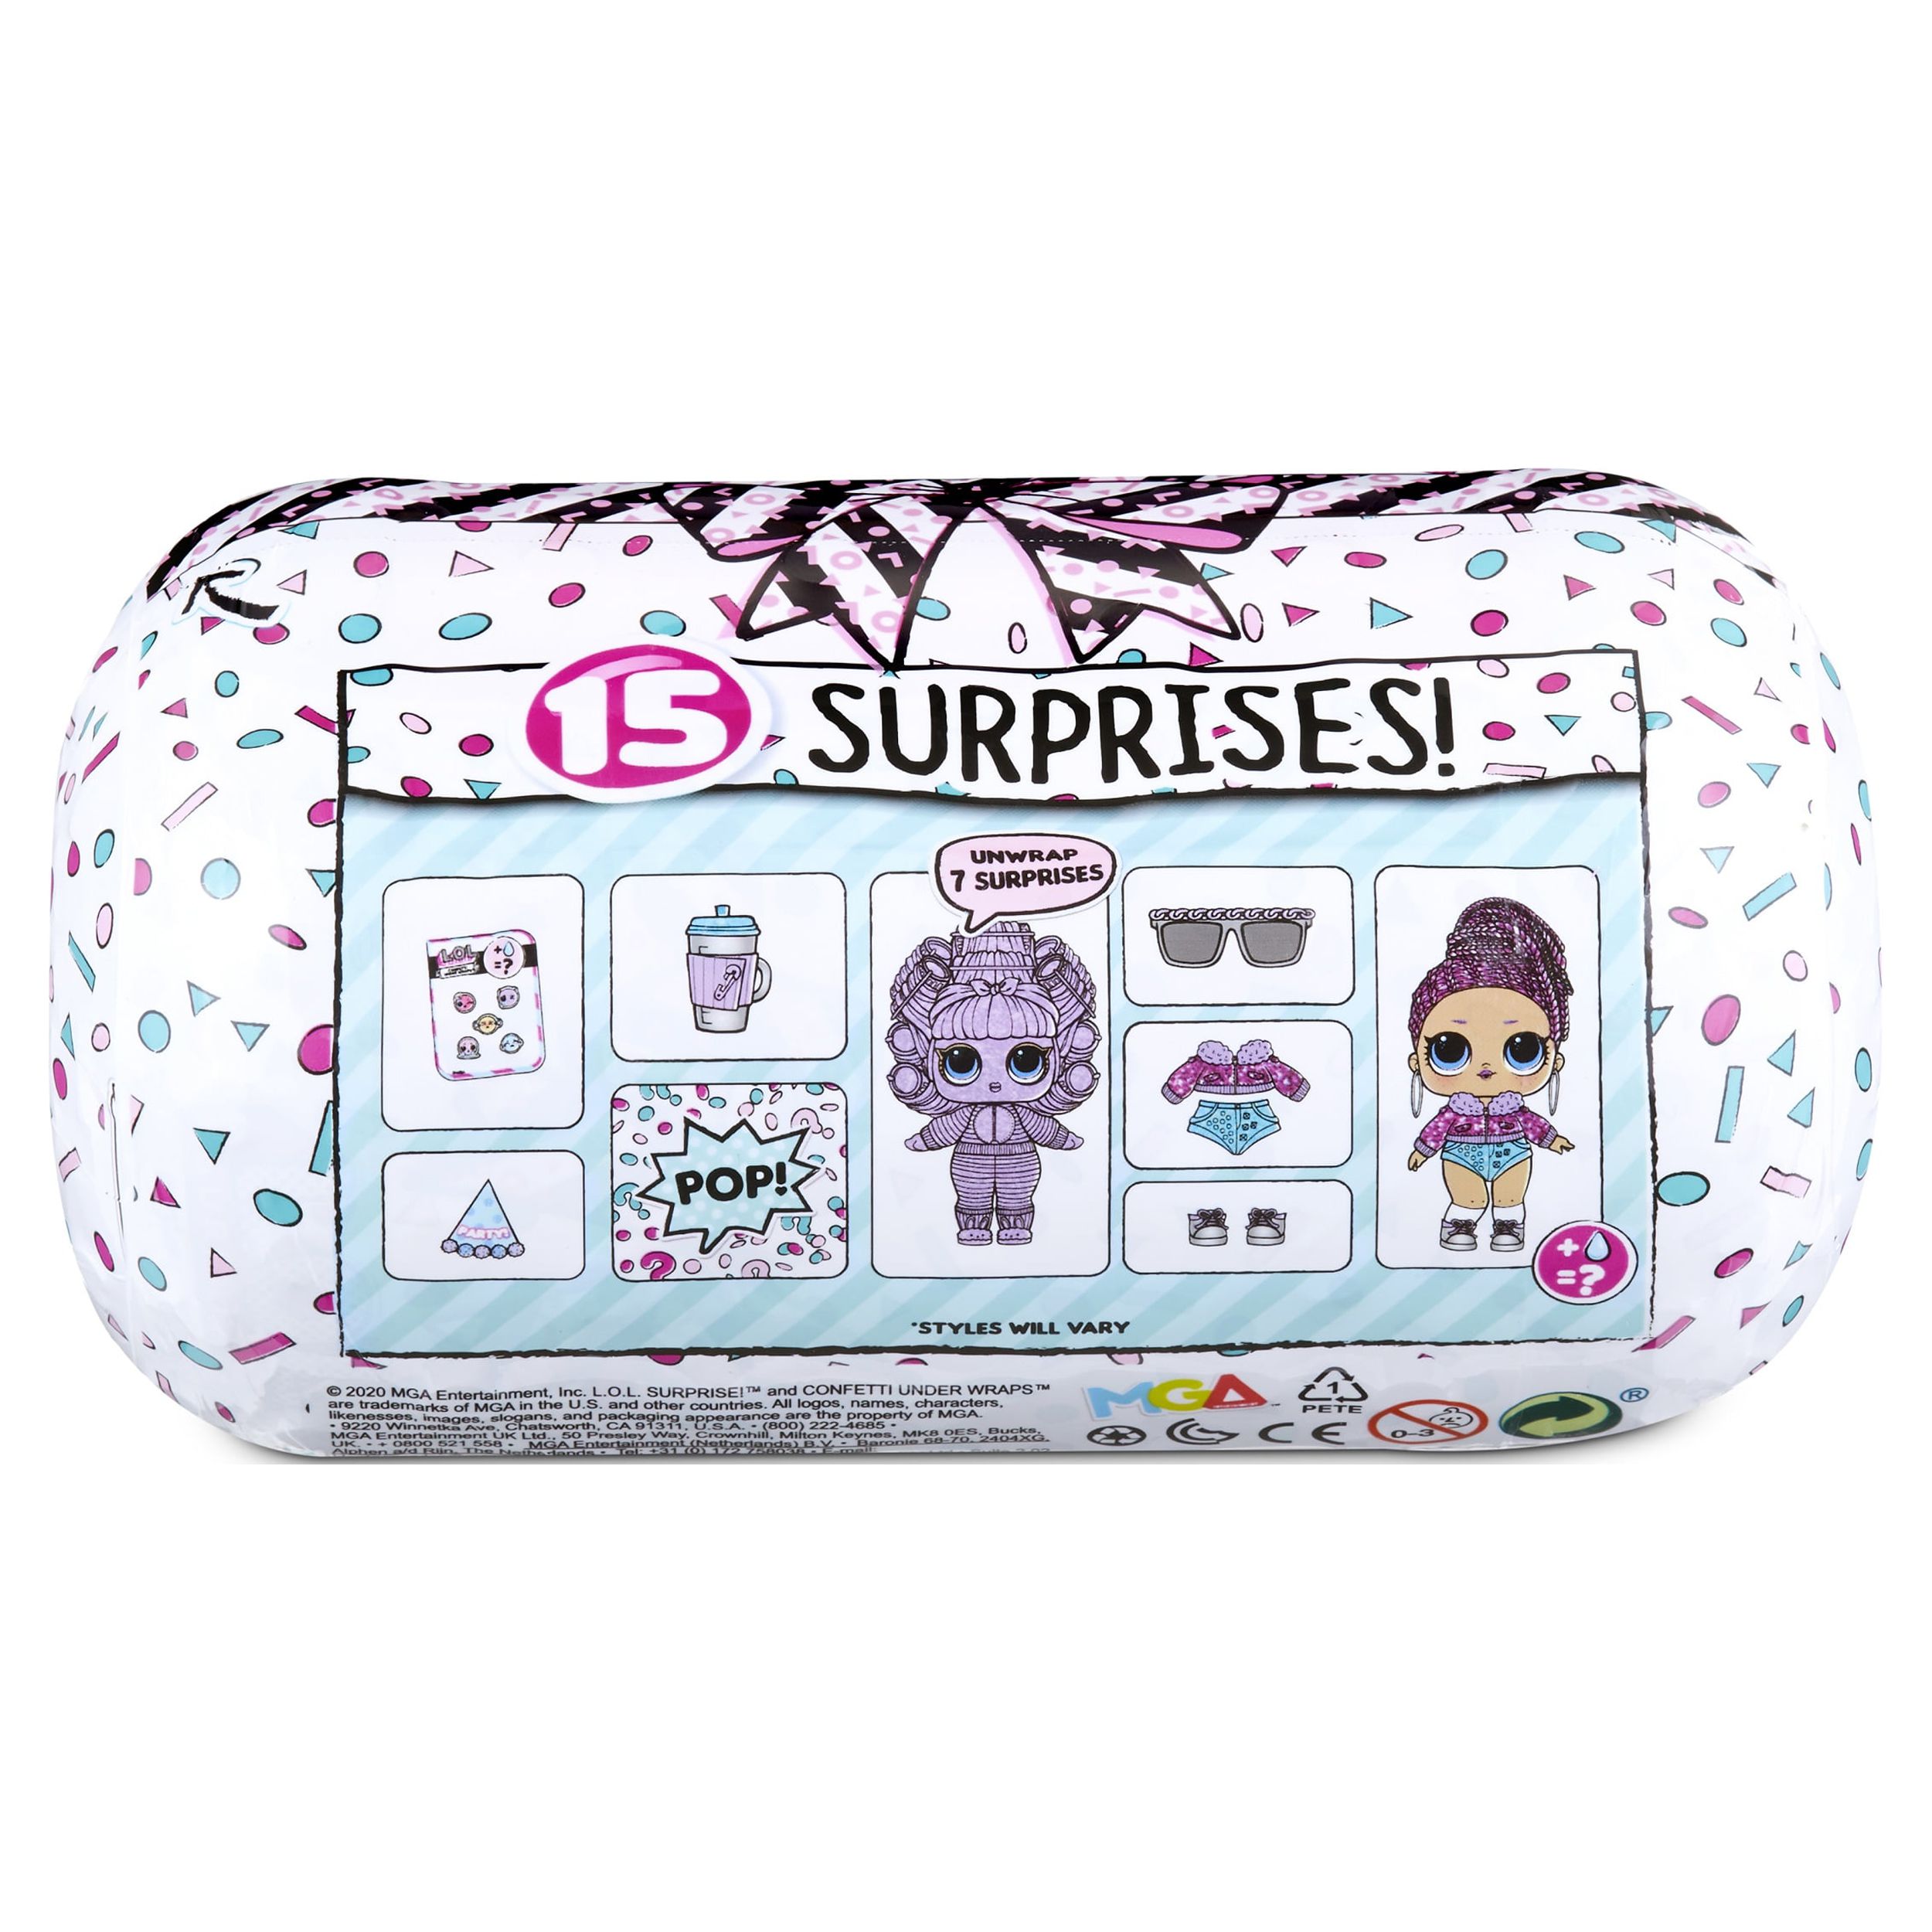 LOL Surprise Confetti Under Wraps Re-released Doll With 15 Surprises - Toys for Girls Ages 4 5 6+ - image 3 of 12